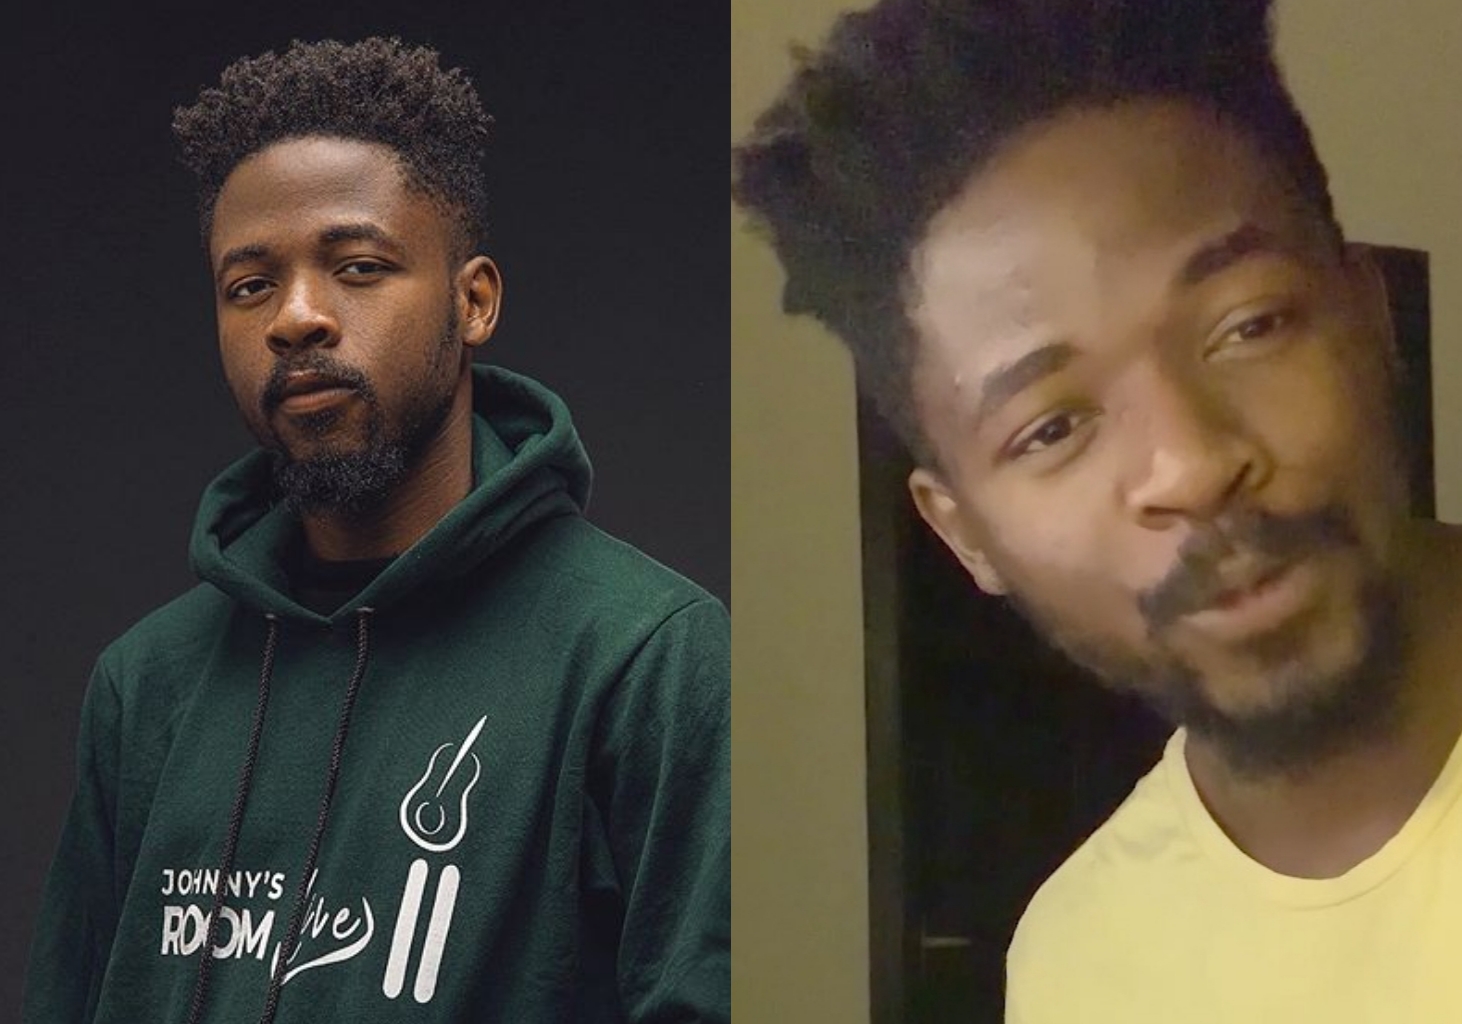 Singer Johnny Drille gives out personal number, fans go crazy (Video)